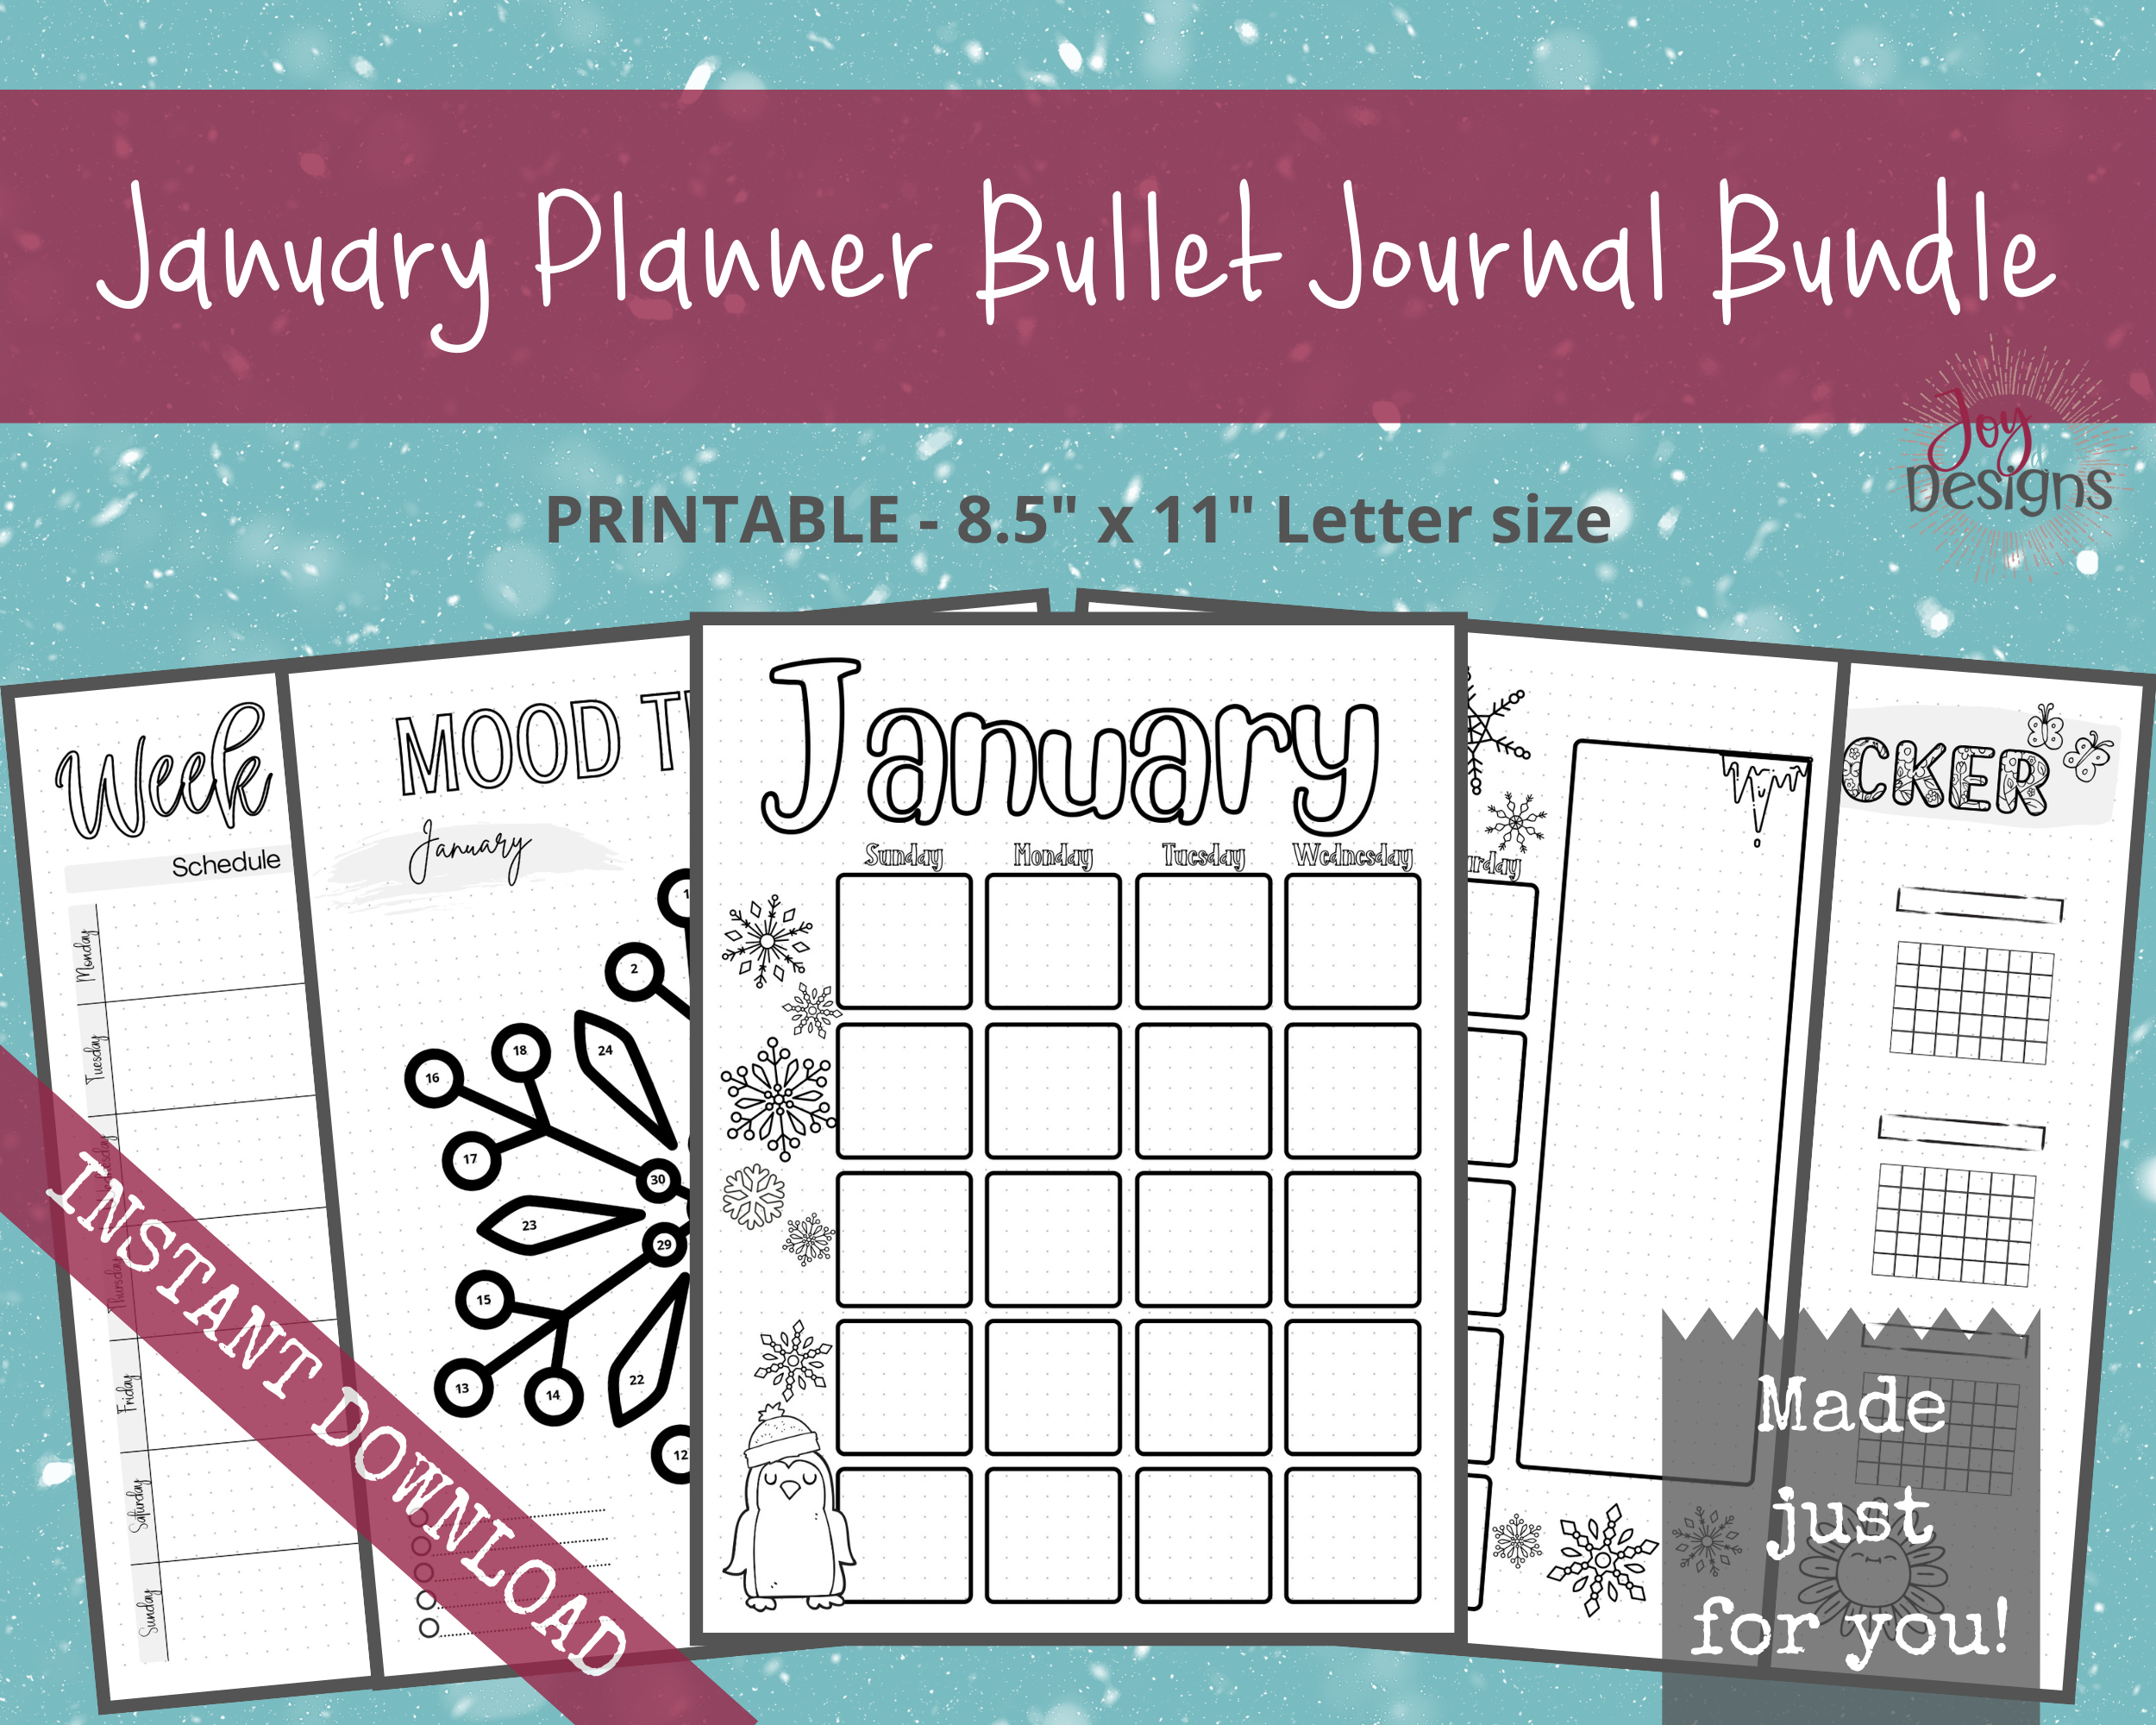 Complete Pre-Made Bullet Journal Pages Instant Download Printable Planner